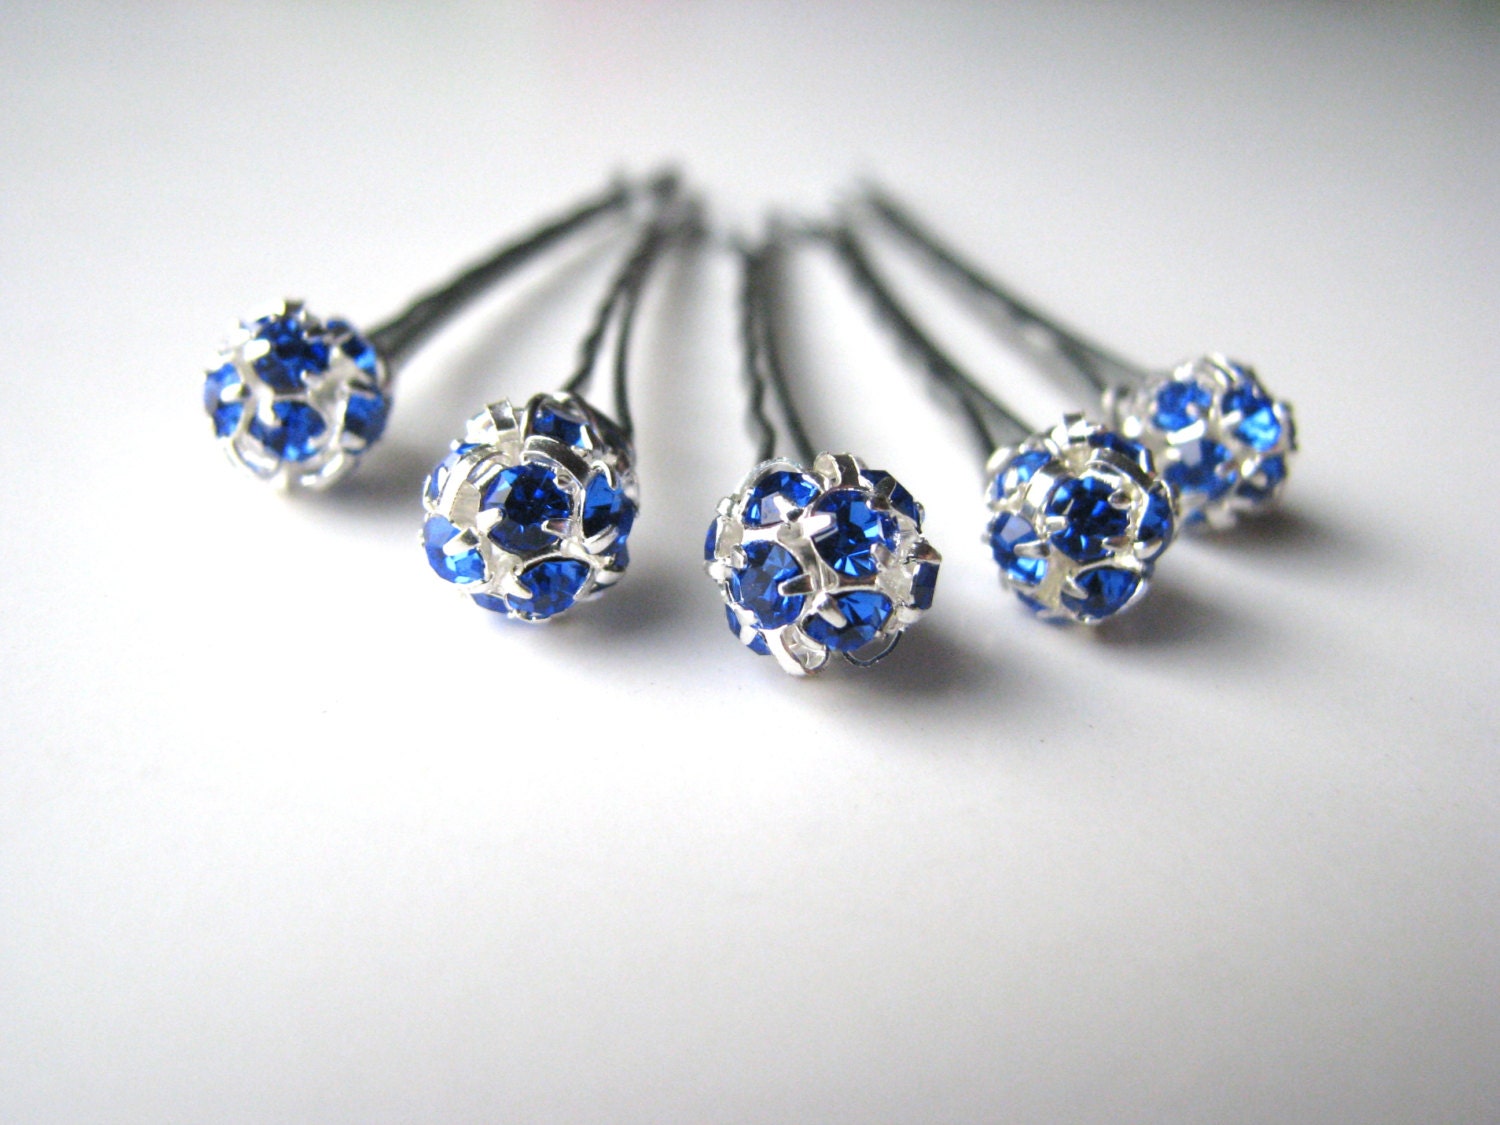 Blue Crystal Bobby Pins - wide 10